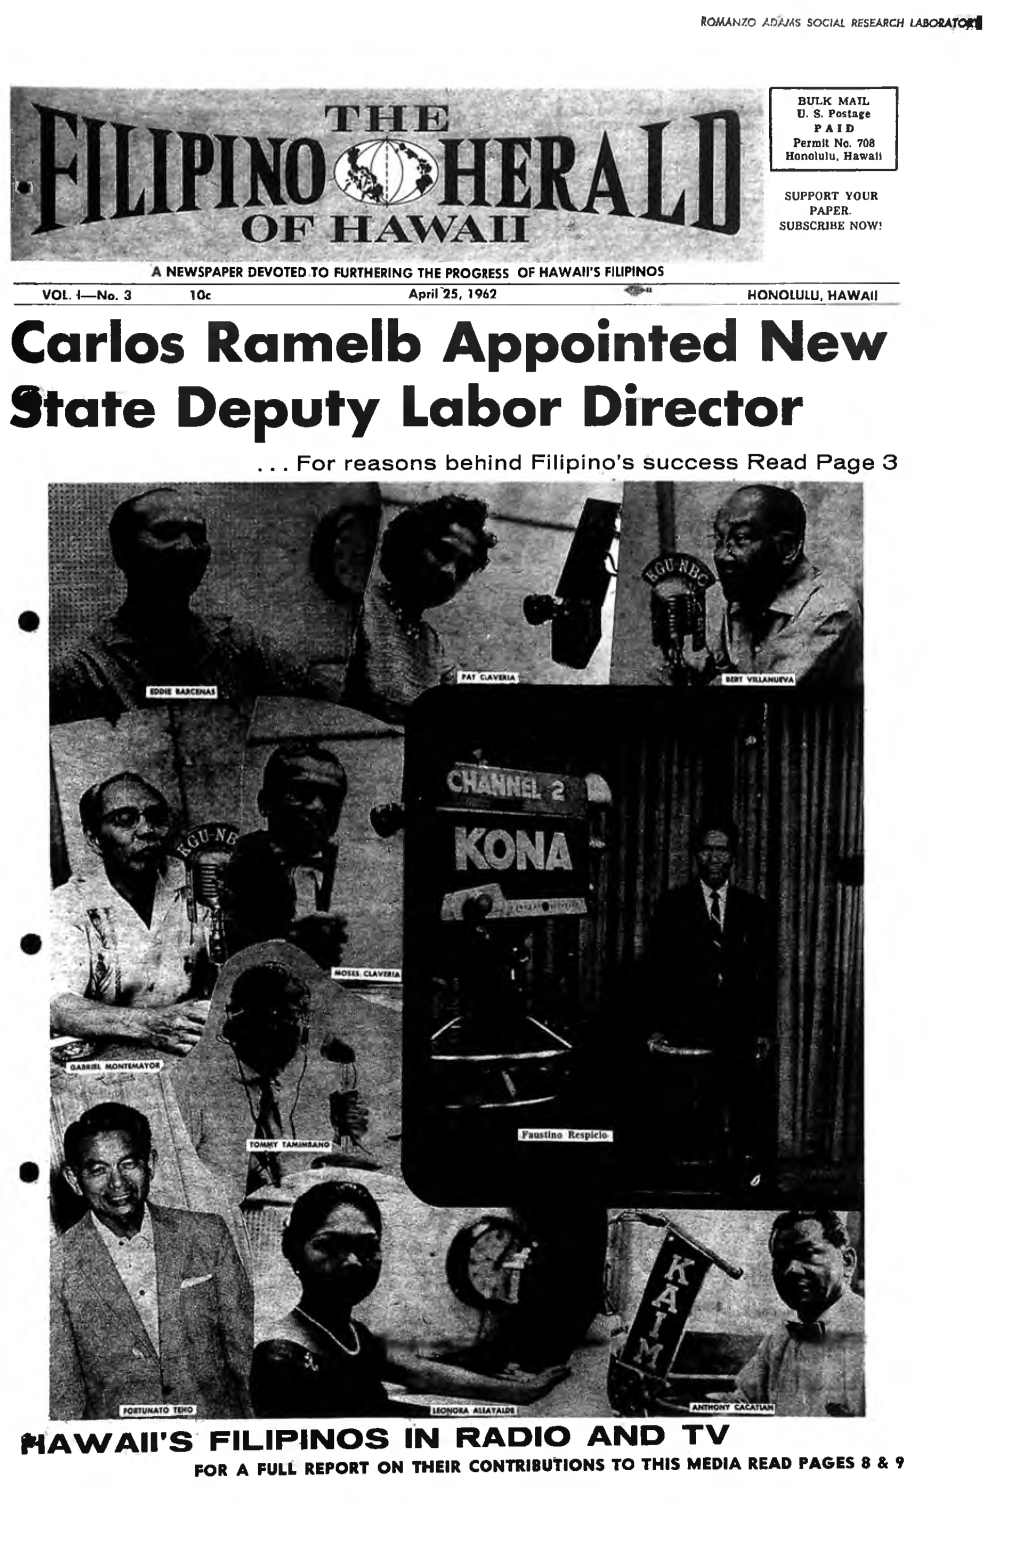 Carlos Ramelb Appointed New State Deputy Labor Director